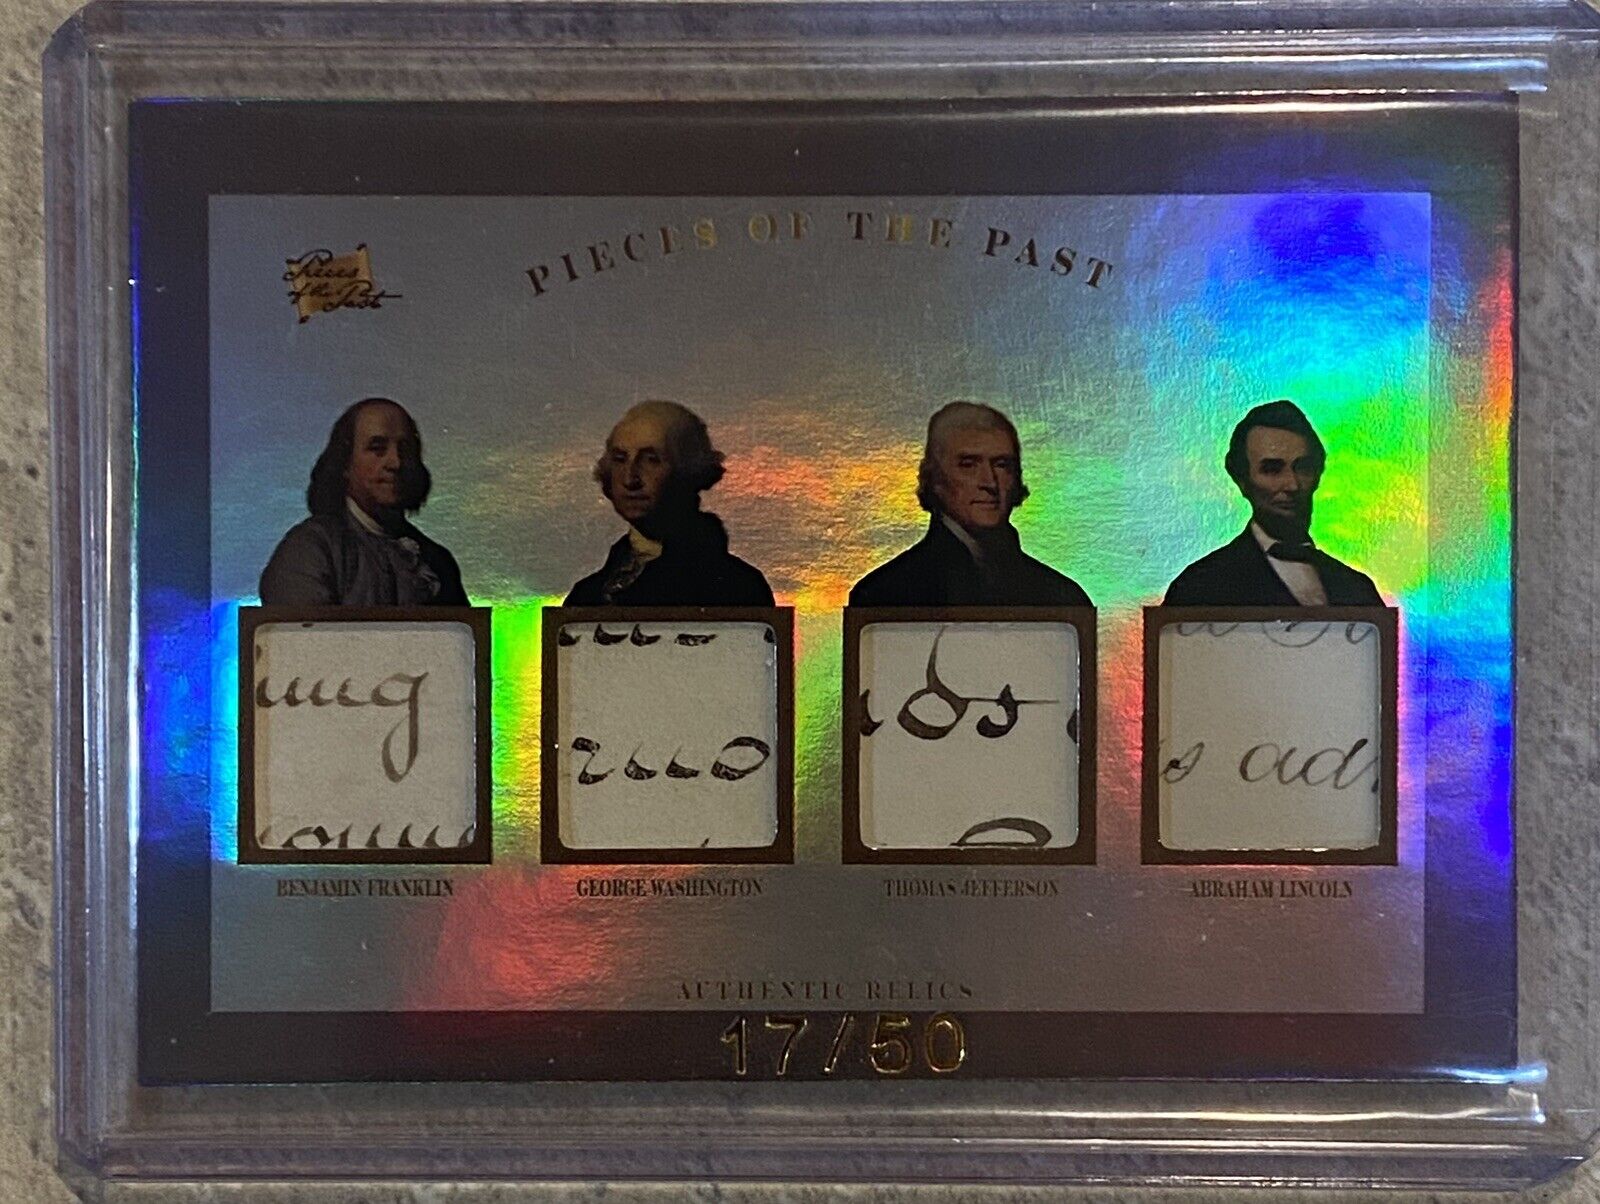 2023 PIECES OF THE PAST QUAD HAND WRITING SAMPLE LINCOLN WASHINGTON FRANKLIN /50